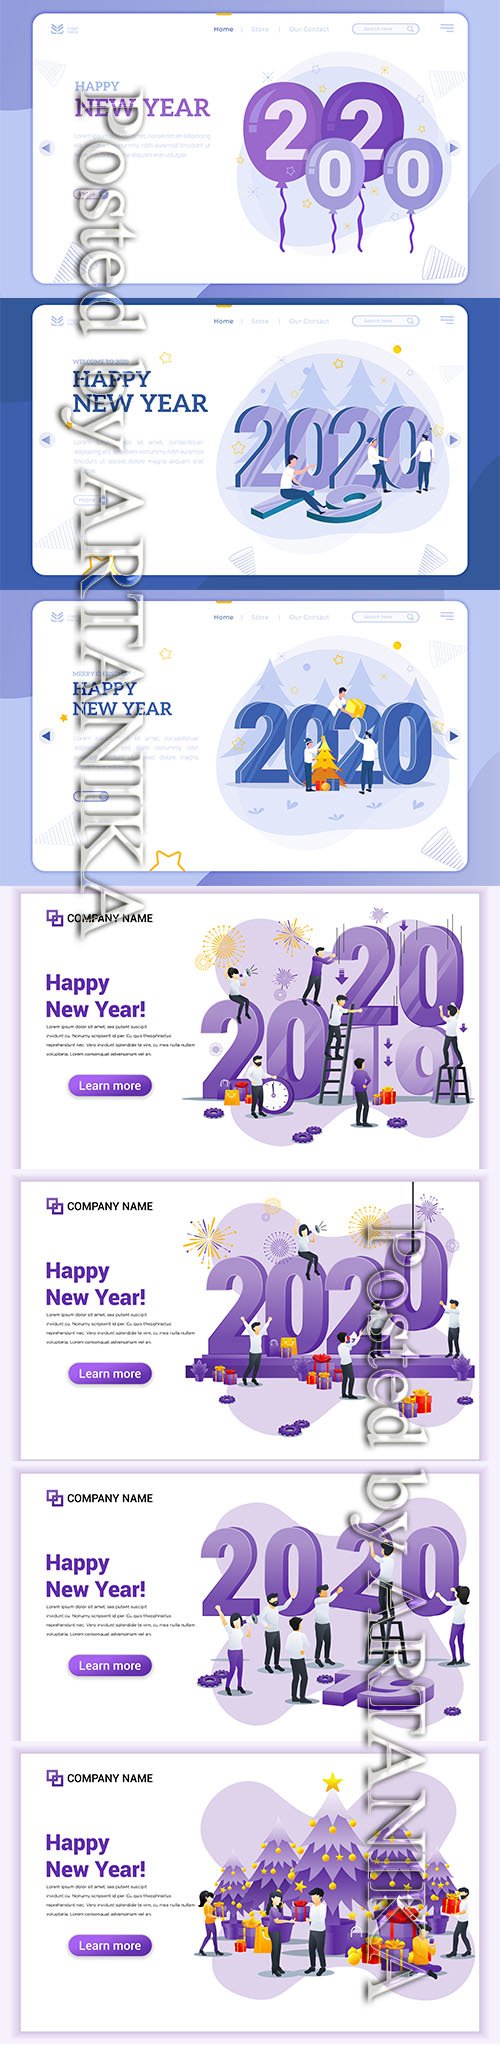 Landing Pages Set - People Celebrating New Year 2020 Vol 2